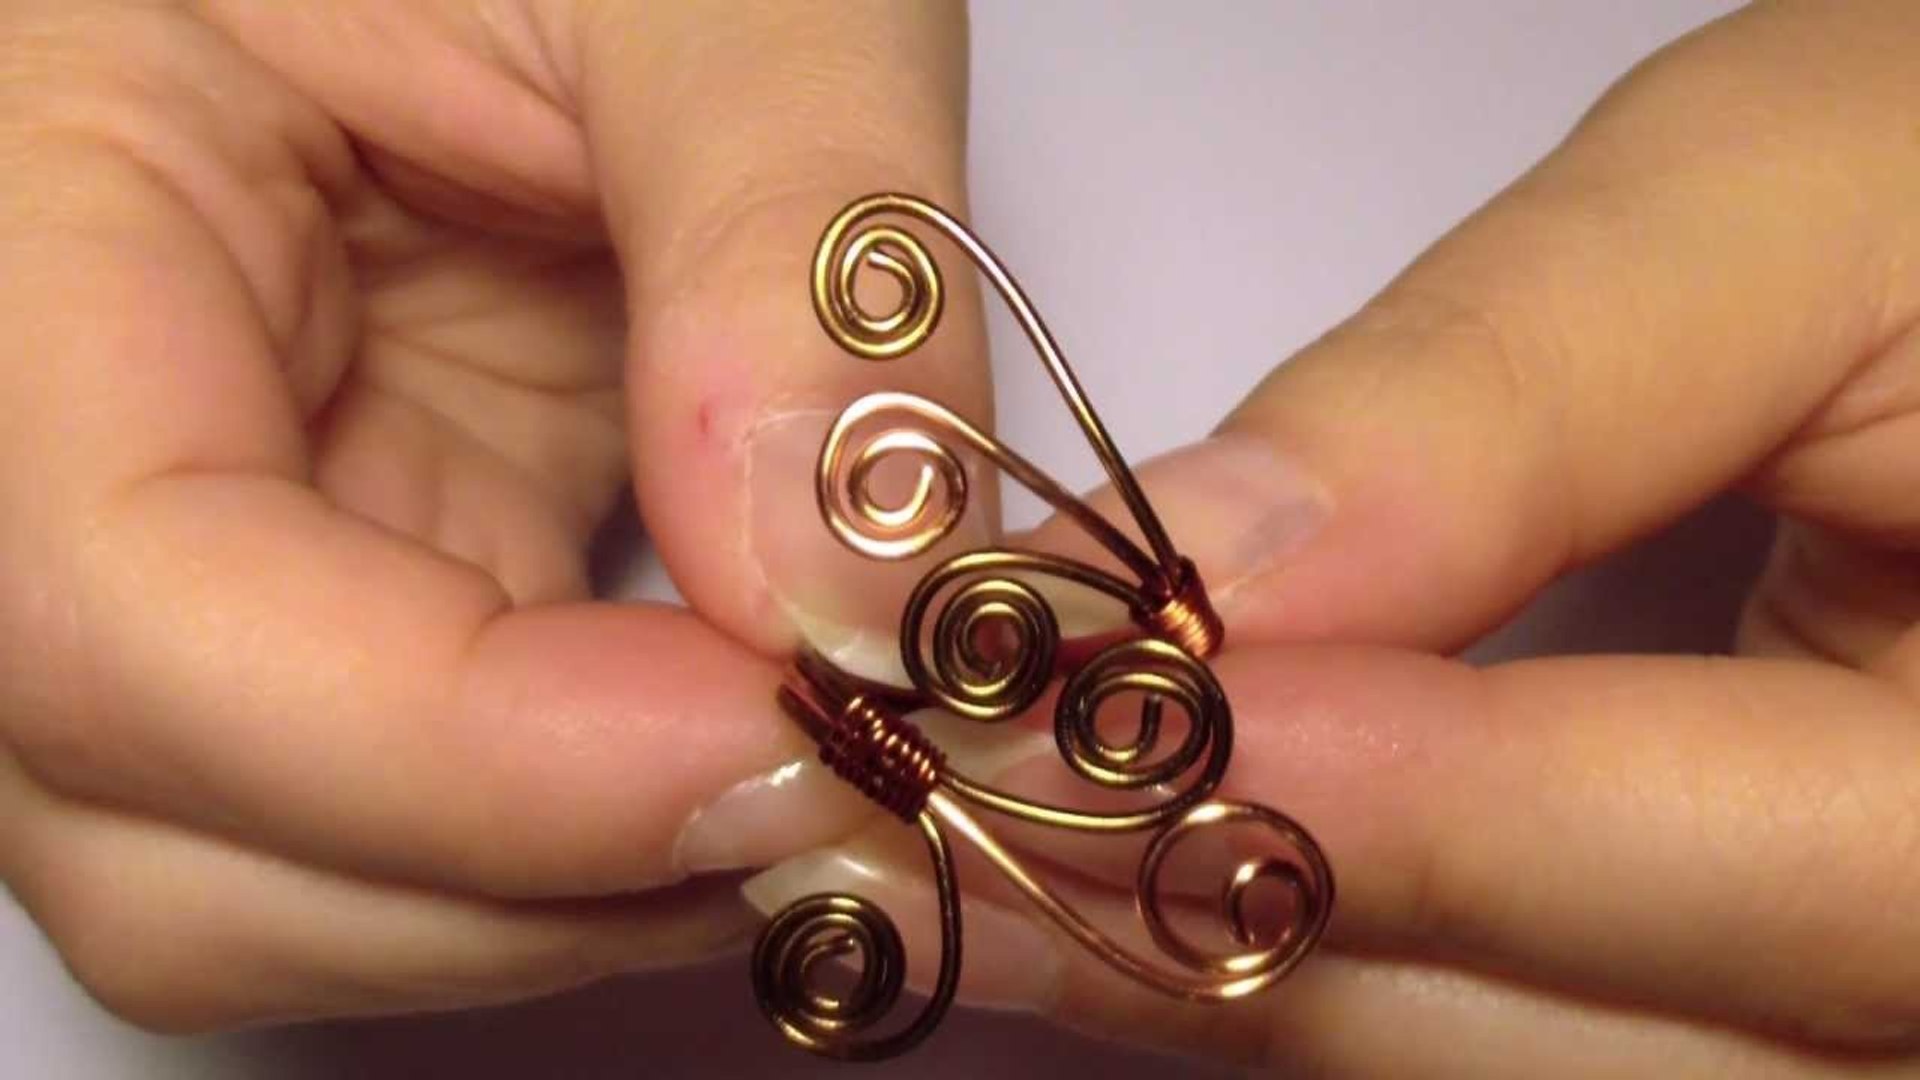 DIY Tutorial | Anello spirali wire / Wire wrapped spiral ring - Video  Dailymotion